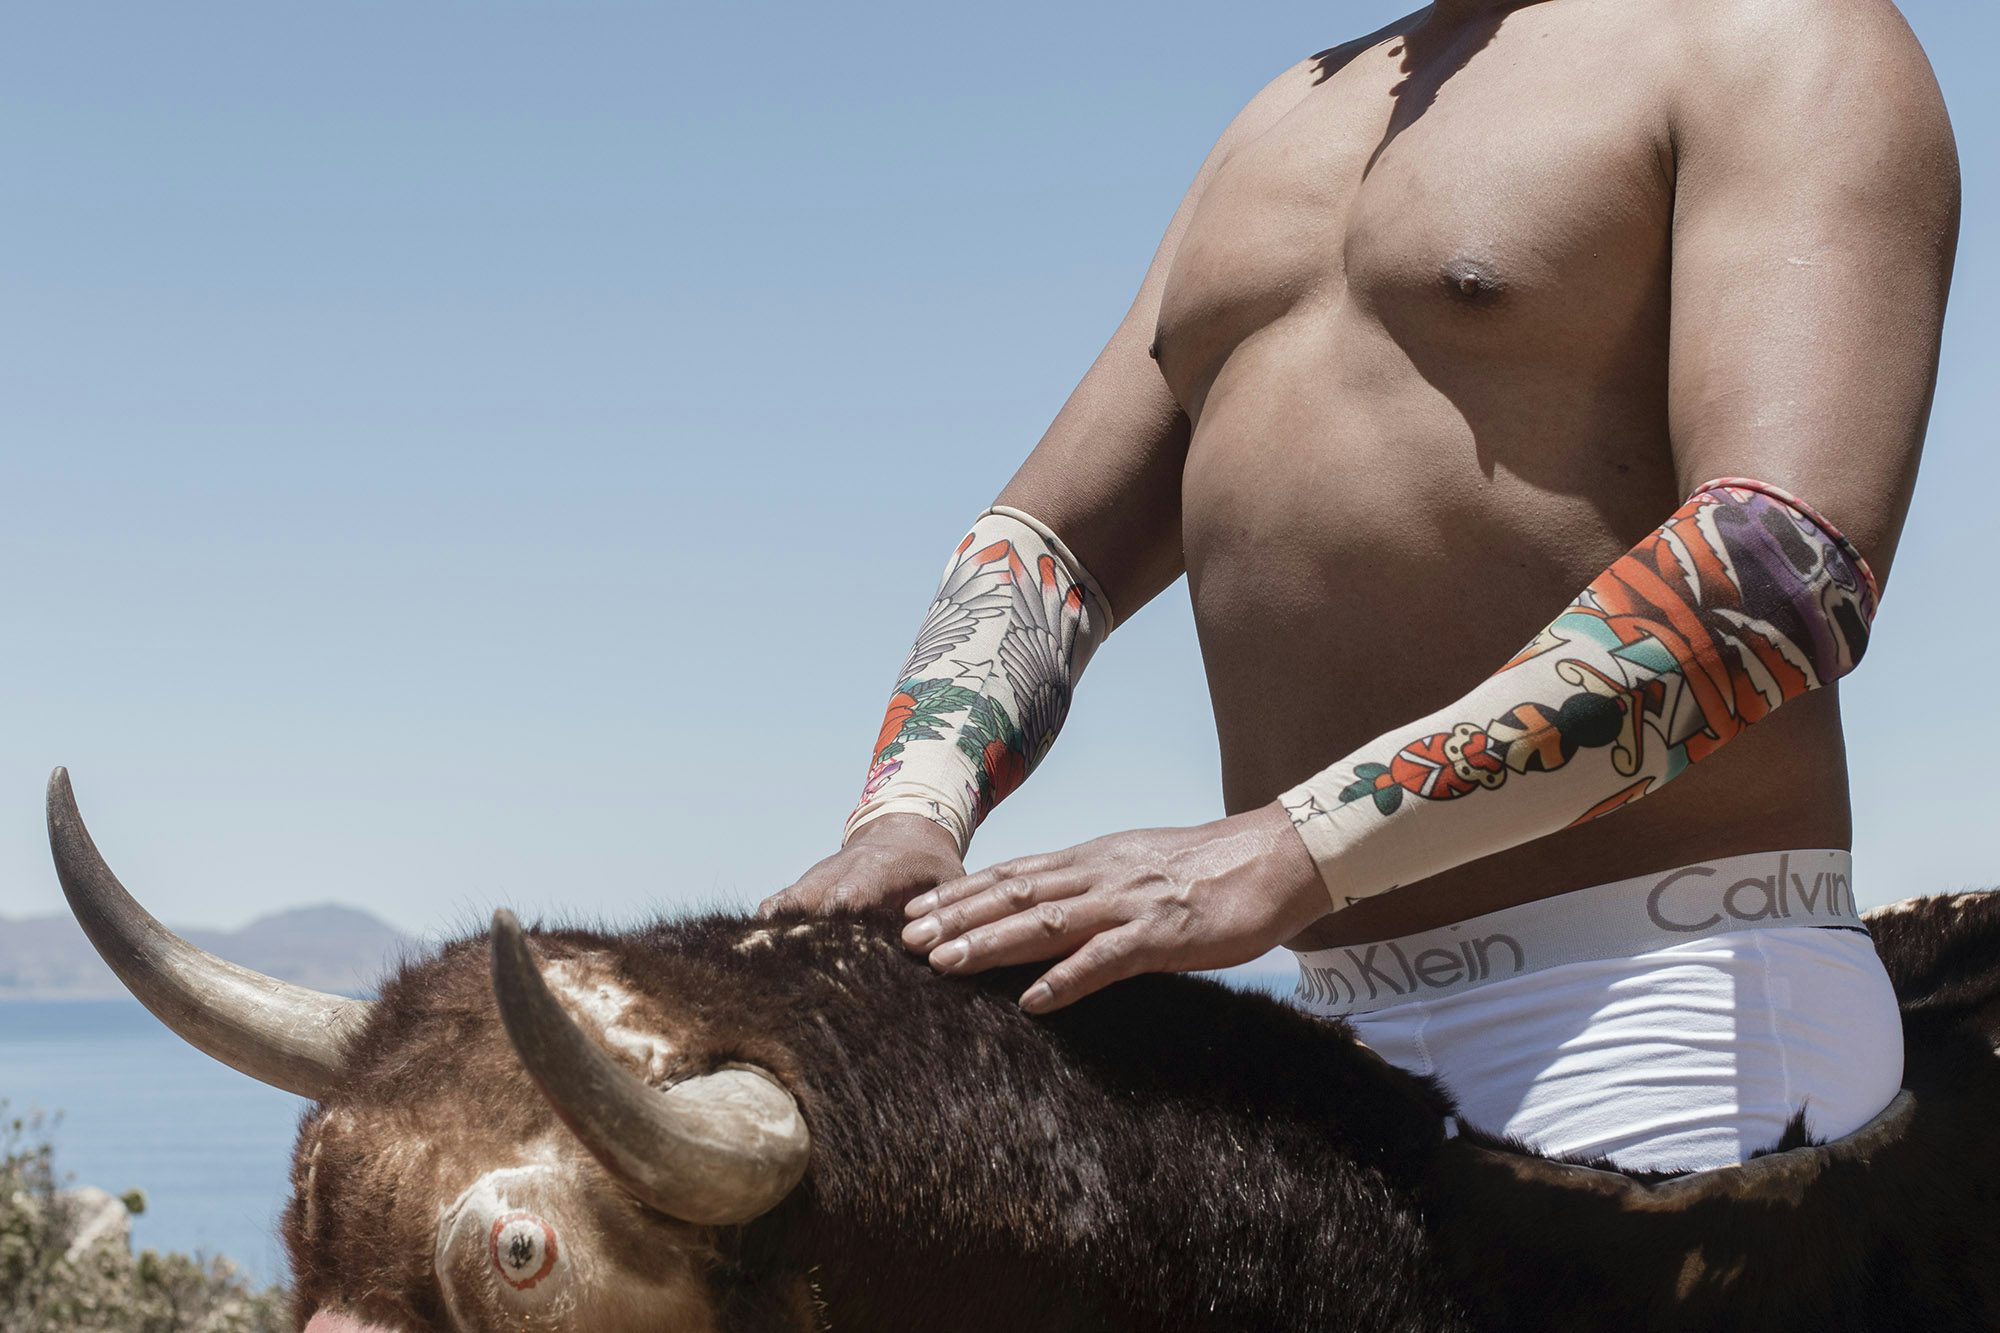 Image by River Claure showing a shirtless person wearing Calvin Klein boxers, stood inside a model of a horned animal as though riding it